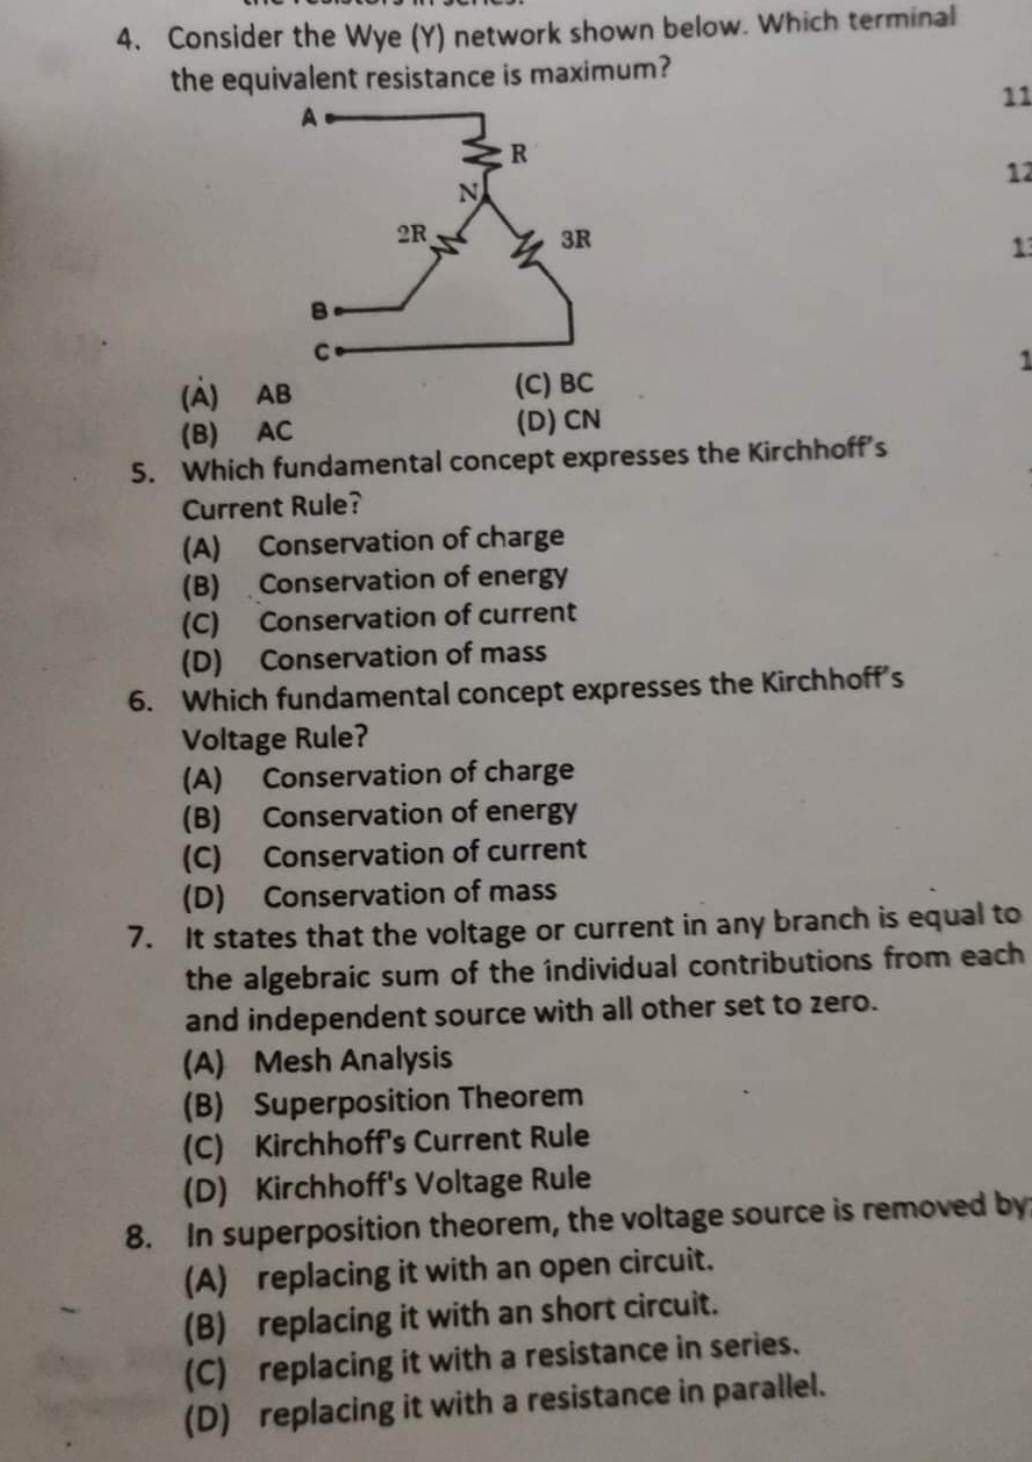 4. Consider the Wye (Y) network shown below. Which terminal
the equivalent resistance is maximum?
2R
R
3R
(C) BC
(D) CN
(A) AB
(B) AC
5. Which fundamental concept expresses the Kirchhoff's
Current Rule?
(A) Conservation of charge
(B) Conservation of energy
(C) Conservation of current
(D) Conservation of mass
6. Which fundamental concept expresses the Kirchhoff's
Voltage Rule?
11
12
13
(A) Conservation of charge
(B)
Conservation of energy
(C)
Conservation of current
(D)
Conservation of mass
7. It states that the voltage or current in any branch is equal to
the algebraic sum of the individual contributions from each
and independent source with all other set to zero.
(A) Mesh Analysis
(B) Superposition Theorem
(C) Kirchhoff's Current Rule
(D) Kirchhoff's Voltage Rule
8. In superposition theorem, the voltage source is removed by:
(A) replacing it with an open circuit.
(B) replacing it with an short circuit.
(C) replacing it with a resistance in series.
(D) replacing it with a resistance in parallel.